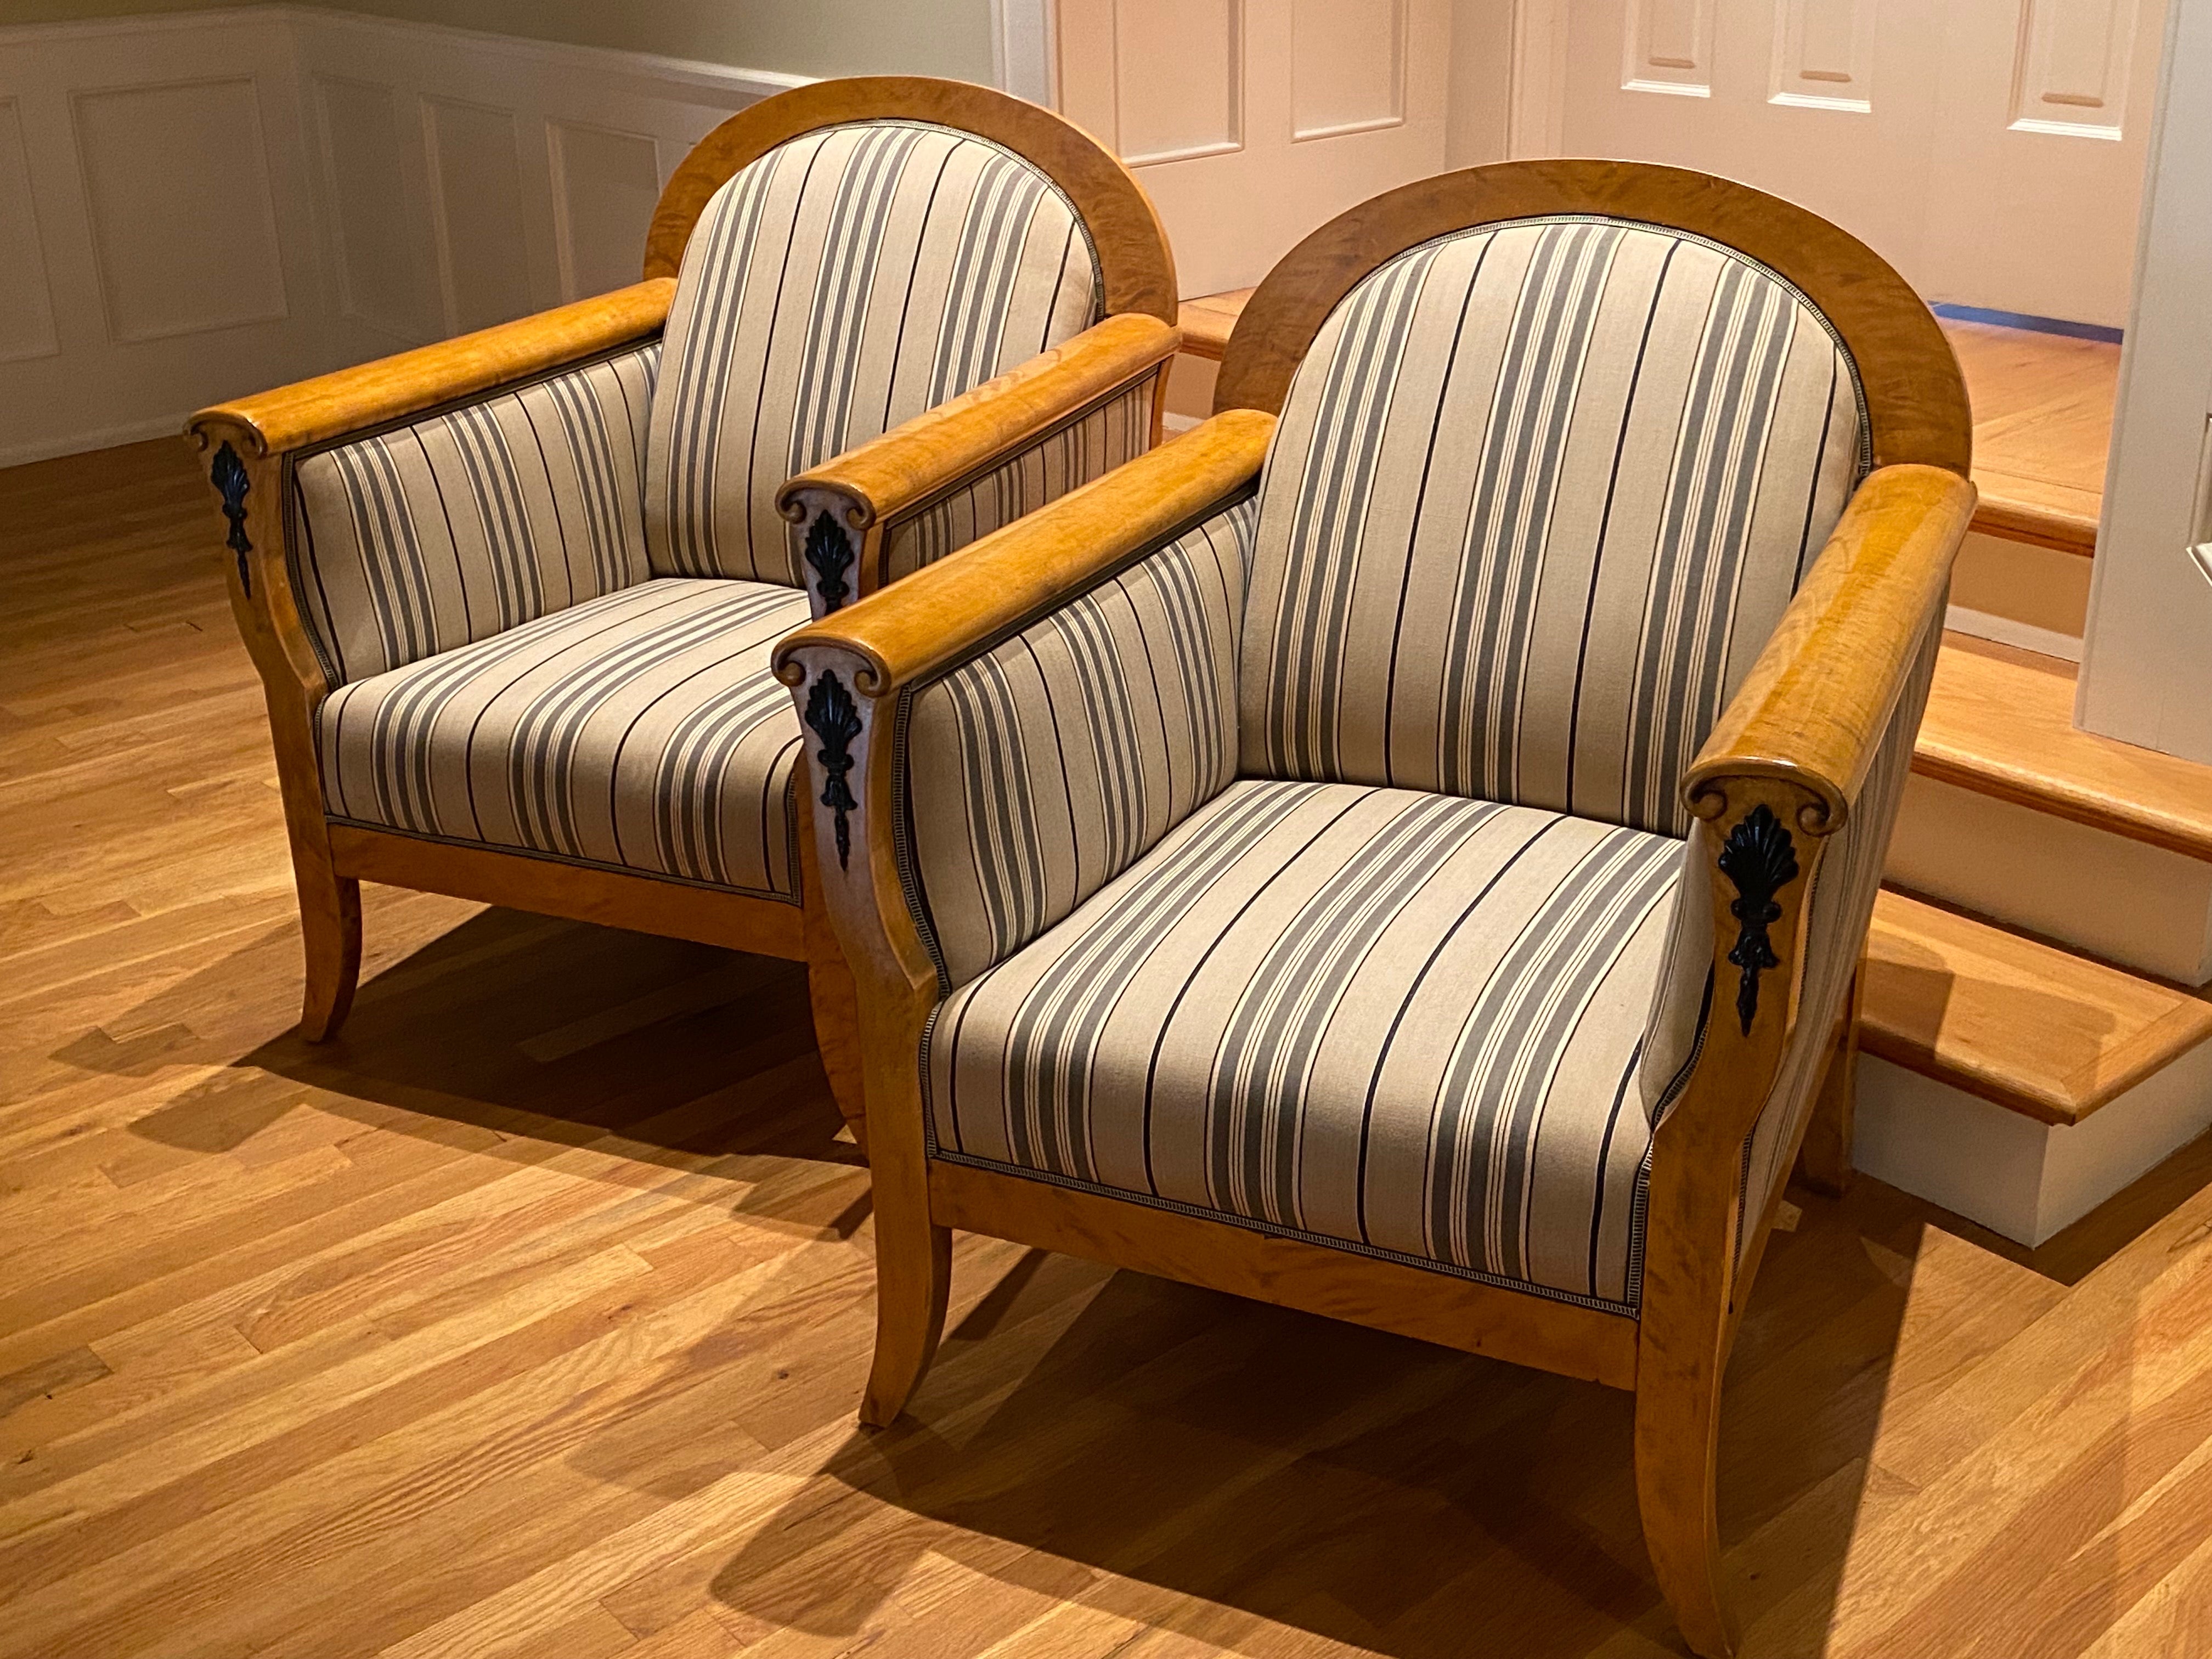 Pair of Northern Europe Biedermeier Birch Armchairs with Ebonized Wood details, Early 1900s. 
Matching a Sofa of the same style in another listing, this lovely pair of lounge chairs is simplified refinement. The early 1900s brought more robust